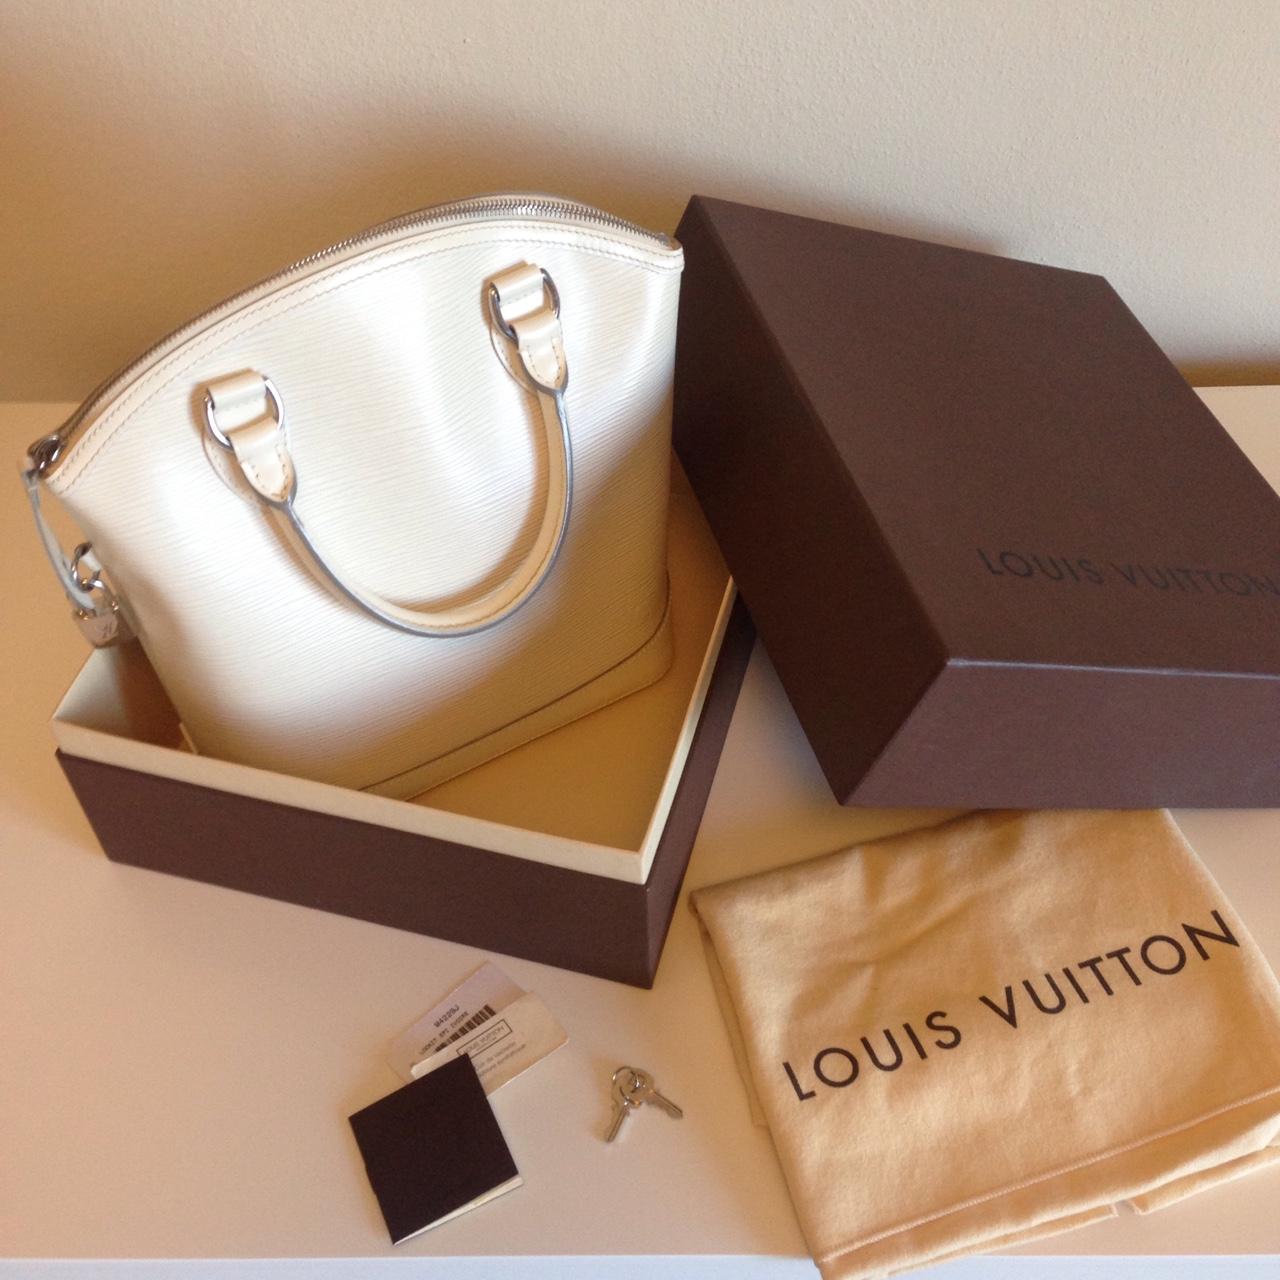 Louis Vuitton “Never Full” Bag - Used (2 years old). - Depop